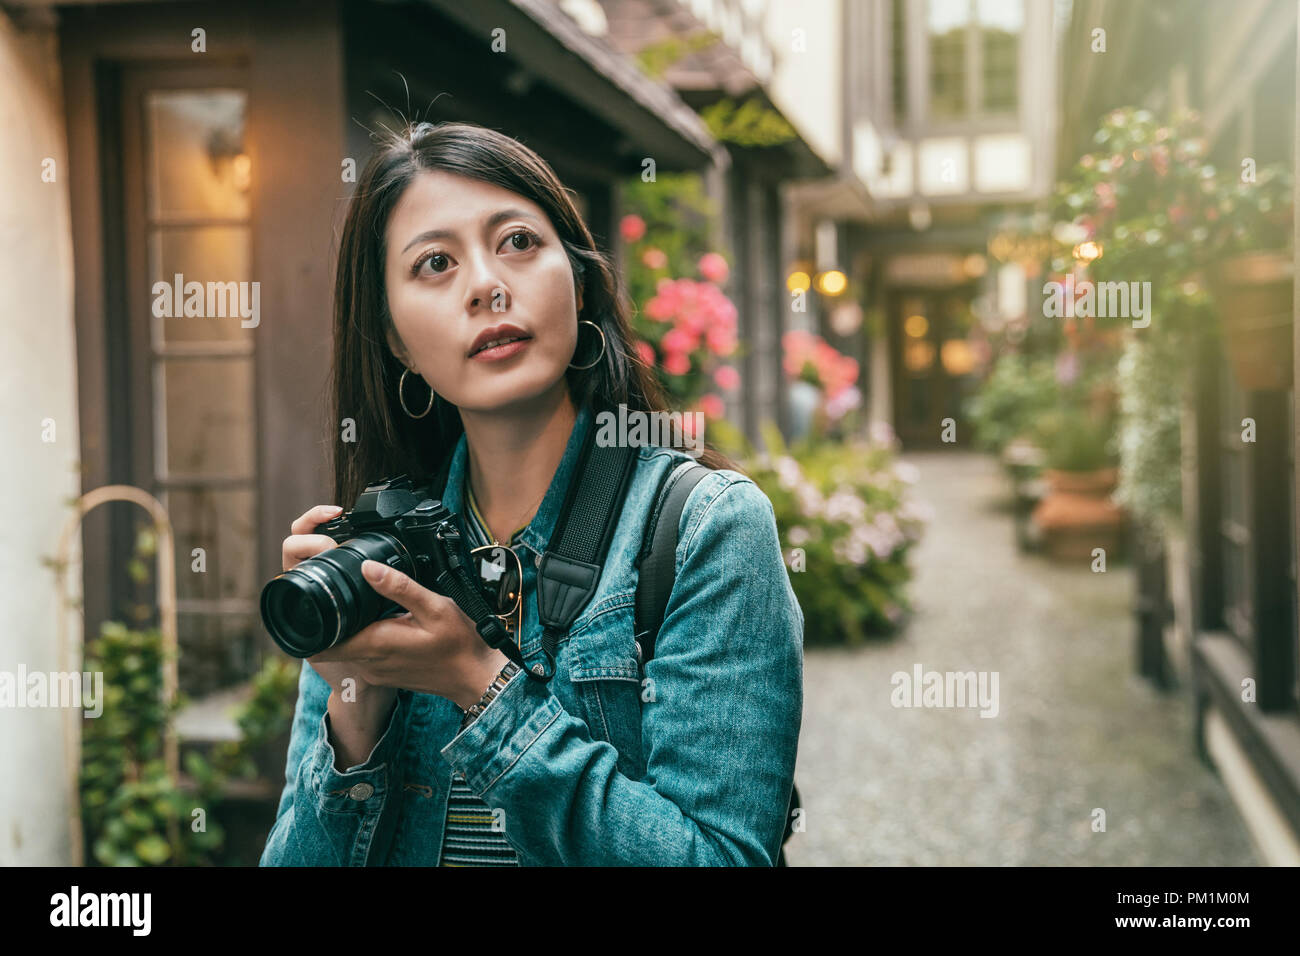 girl taking photos in a alley surrounded by the vintage houses in a town. Stock Photo